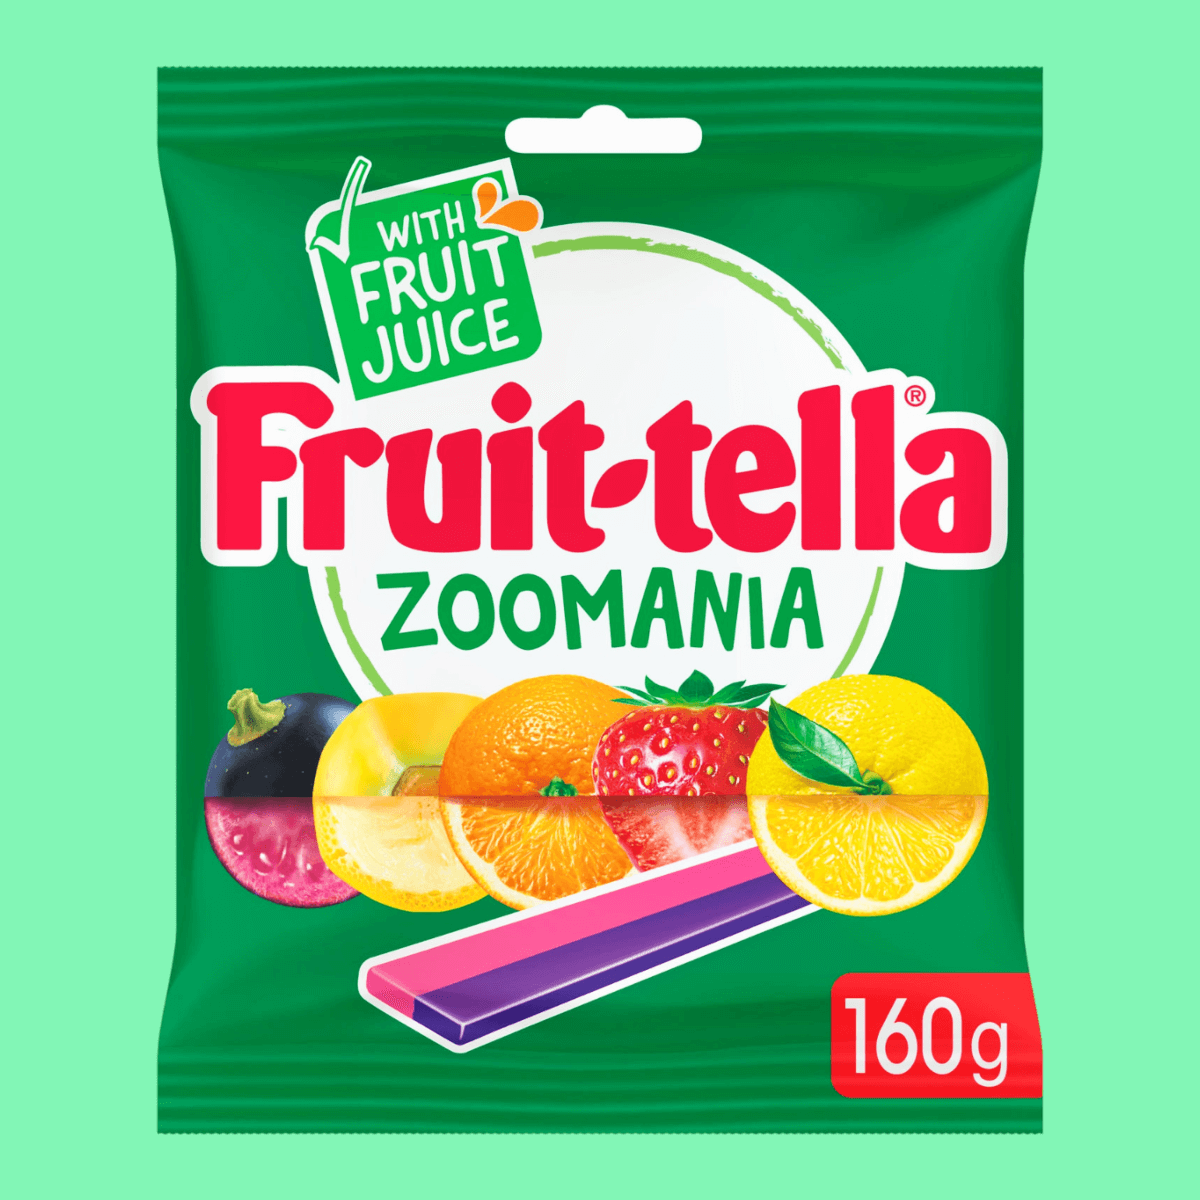 Pouch of Fruit-tella Zoo Mania. Green packaging with red title text and pictures of fruits sliced in half